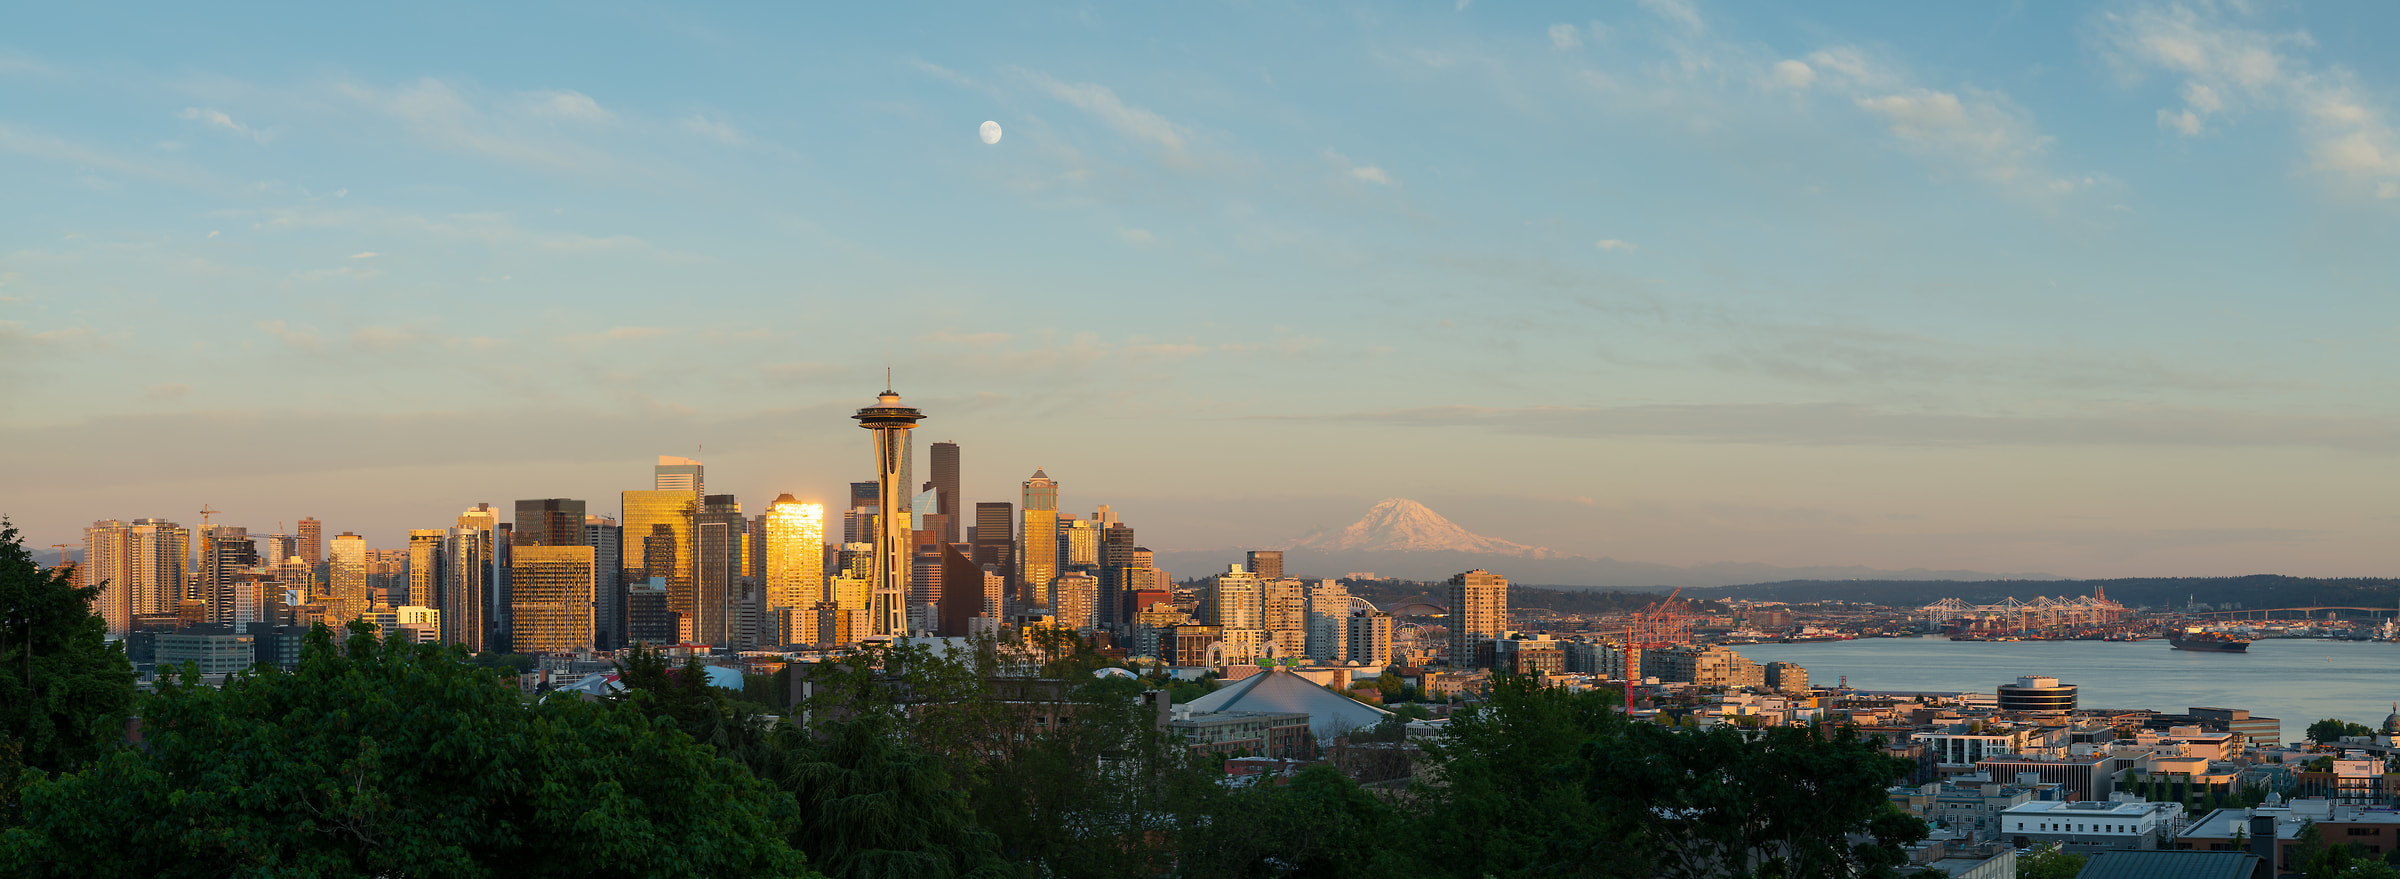 350 megapixels! A very high resolution, large-format VAST photo print of the Seattle skyline with Mt. Rainier and the moon in the background; cityscape photograph created by Greg Probst in Seattle, WA